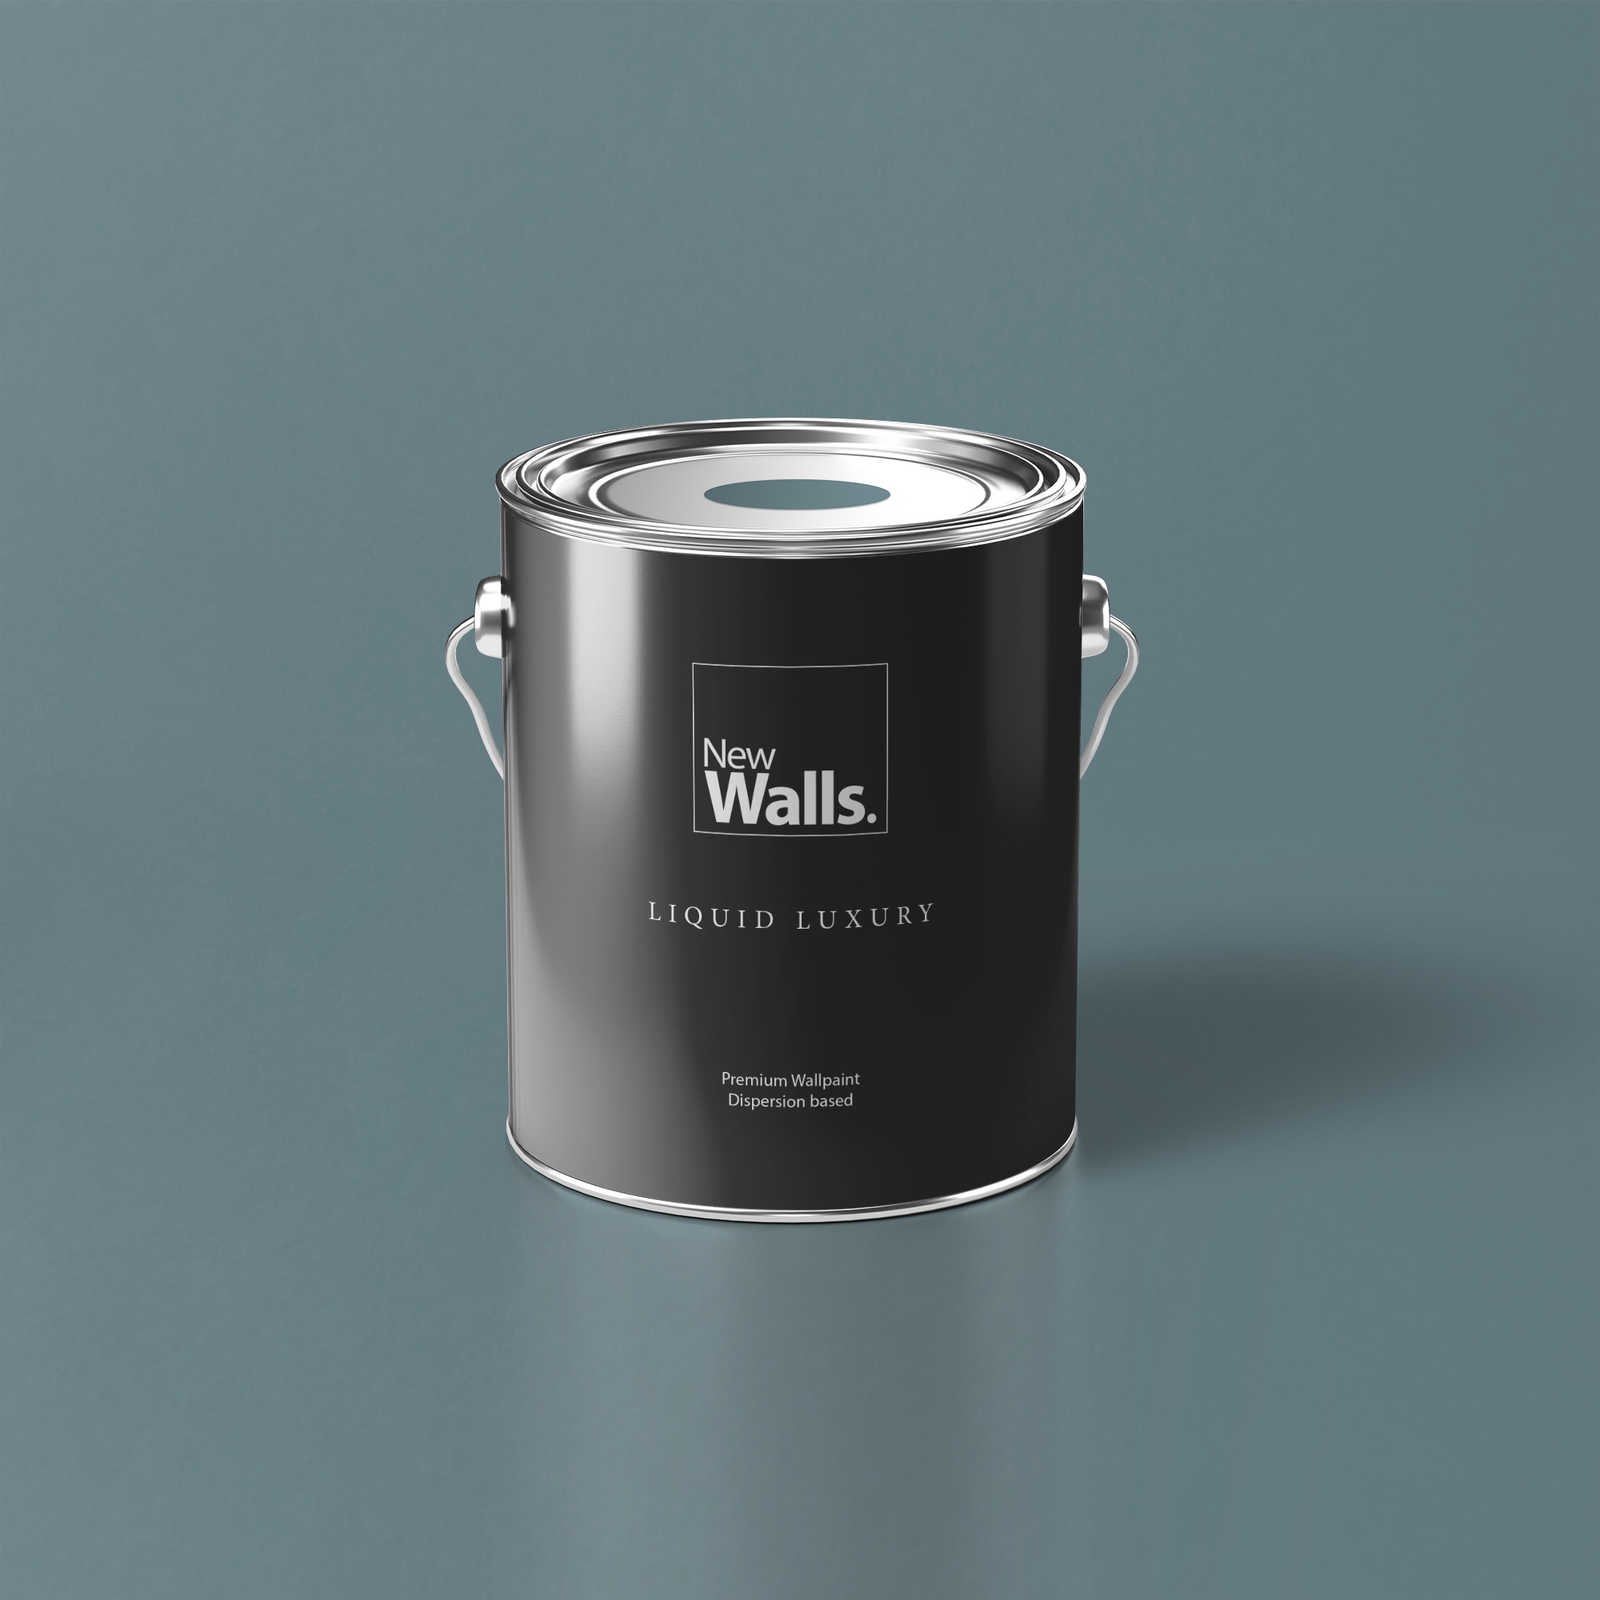 Premium Wall Paint Relaxing Dove Blue »Balanced Blue« NW311 – 5 litre
